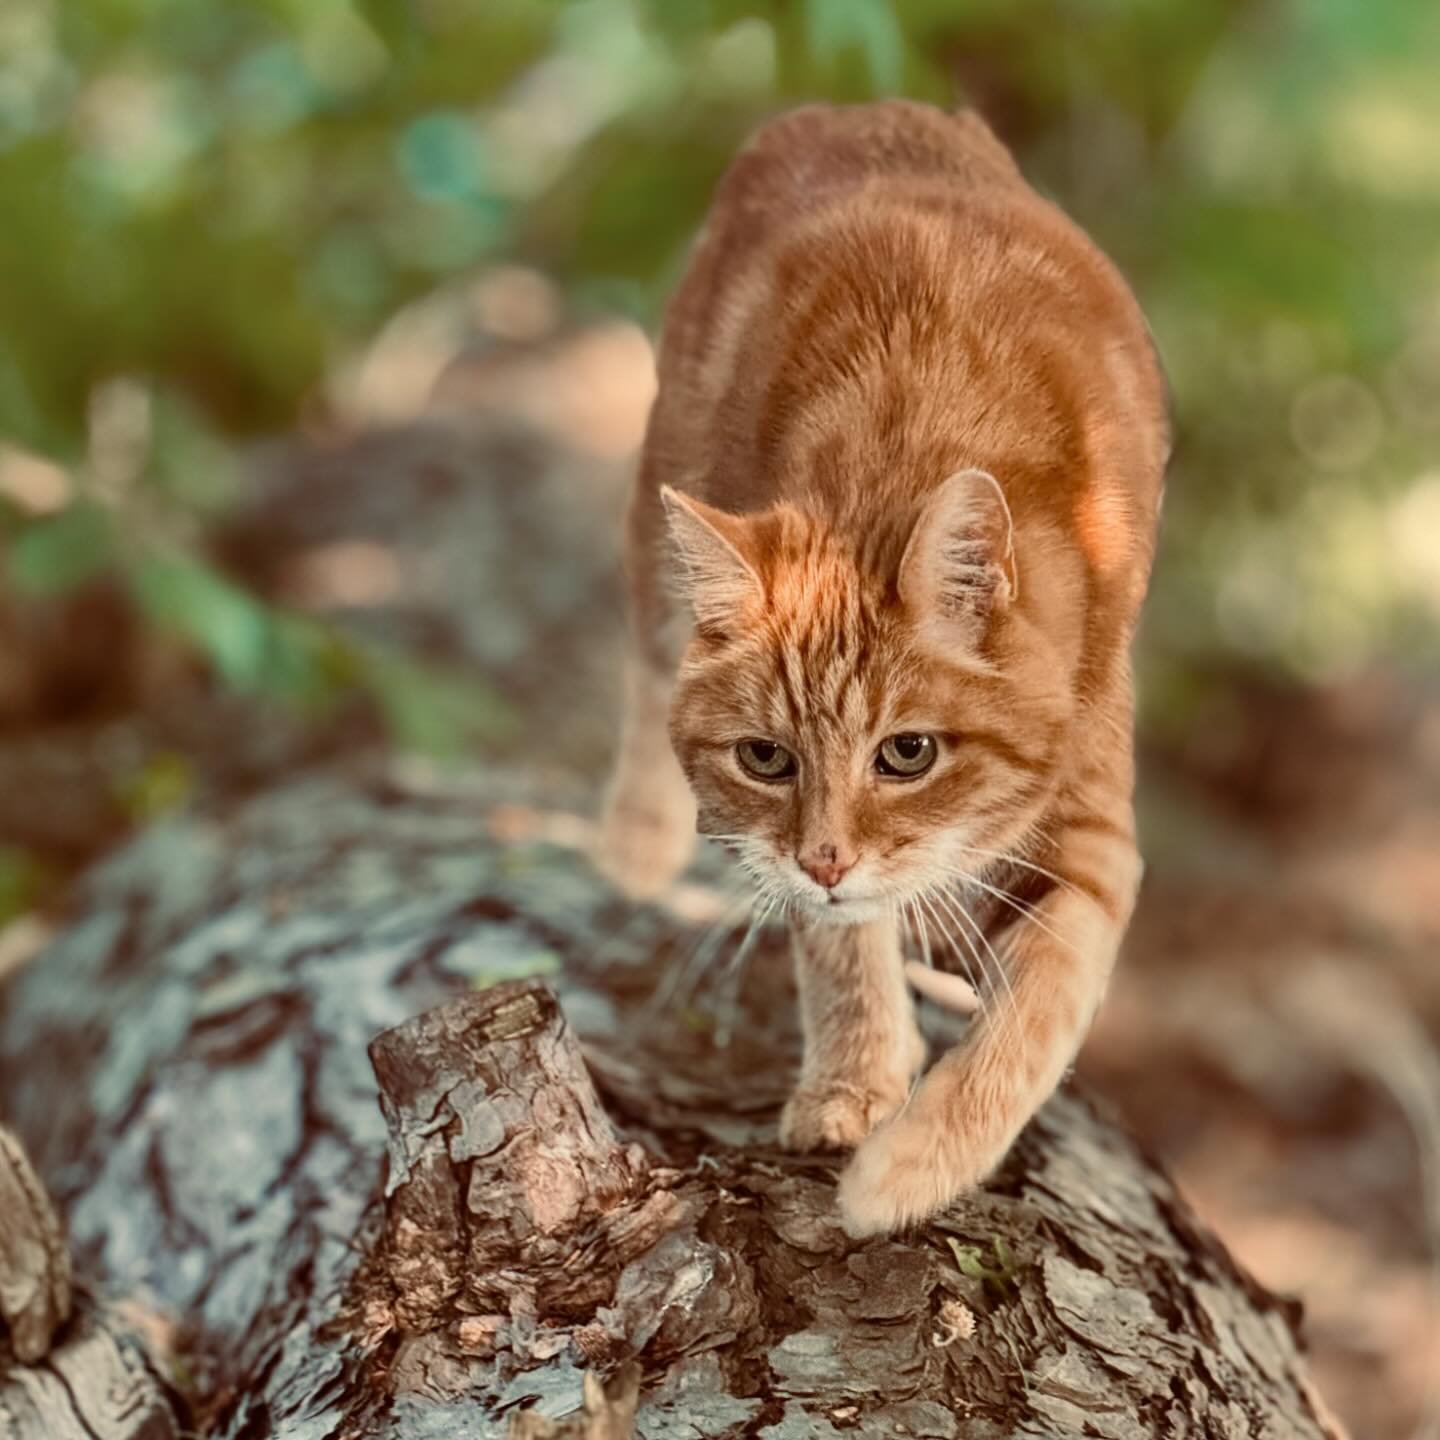 Sunny Morning Walk with Balthasar. He really enjoys the upcoming summer vibes and is happy to explore the forest&hellip;

#schiller #catlover #summer #sunshine #morningwalk #voyage #happiness #thejourneycontinues #schillermusic